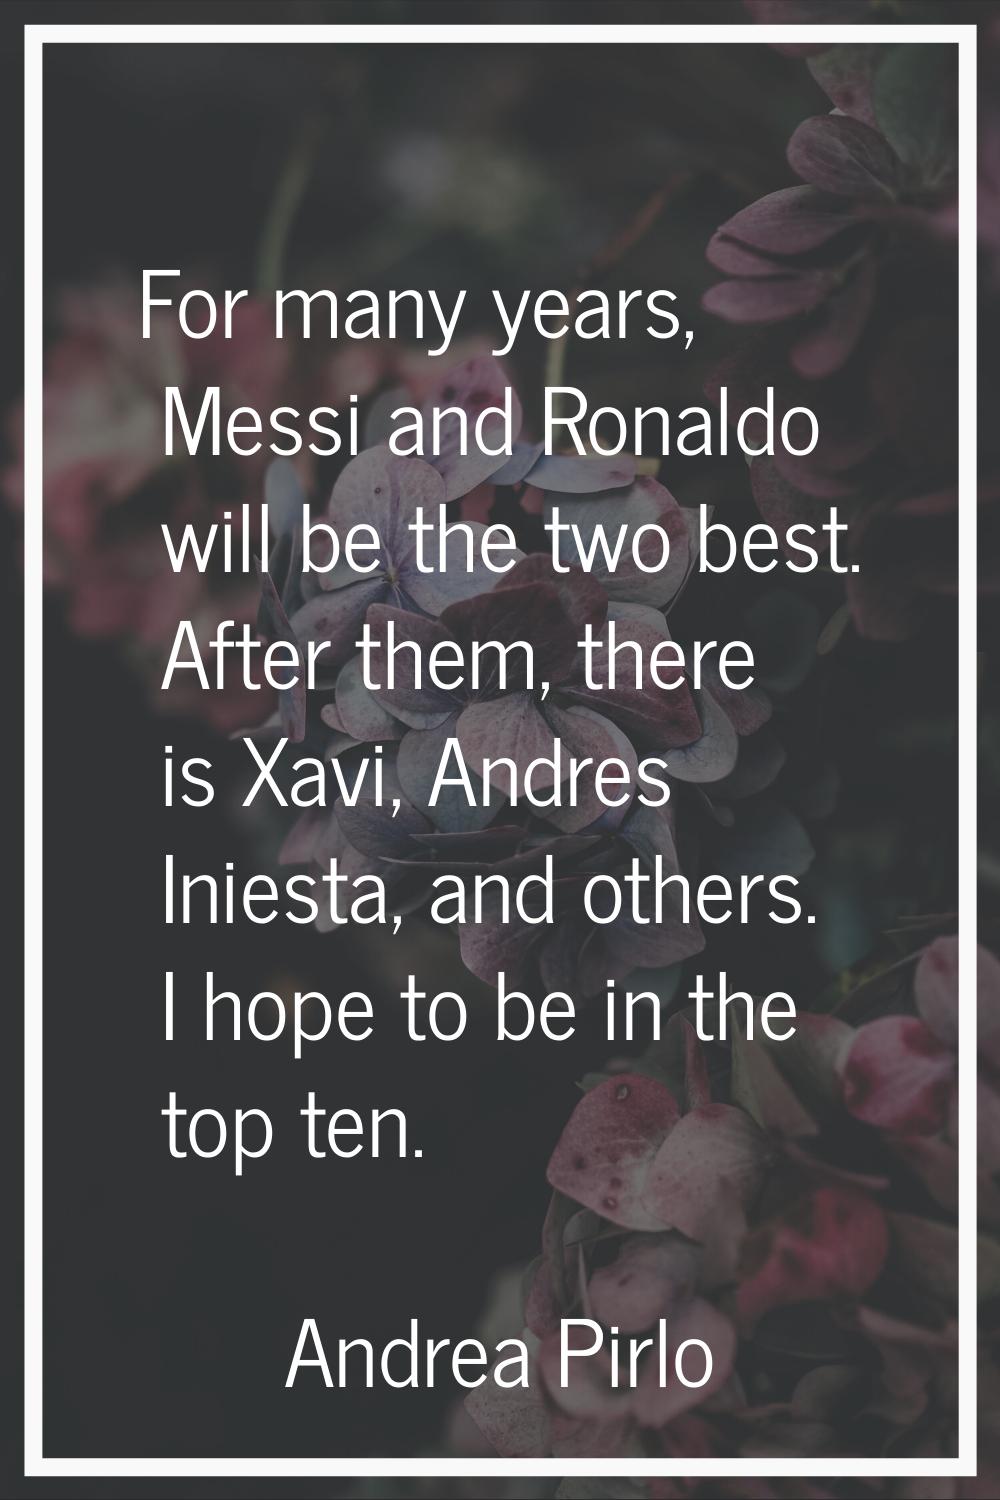 For many years, Messi and Ronaldo will be the two best. After them, there is Xavi, Andres Iniesta, 